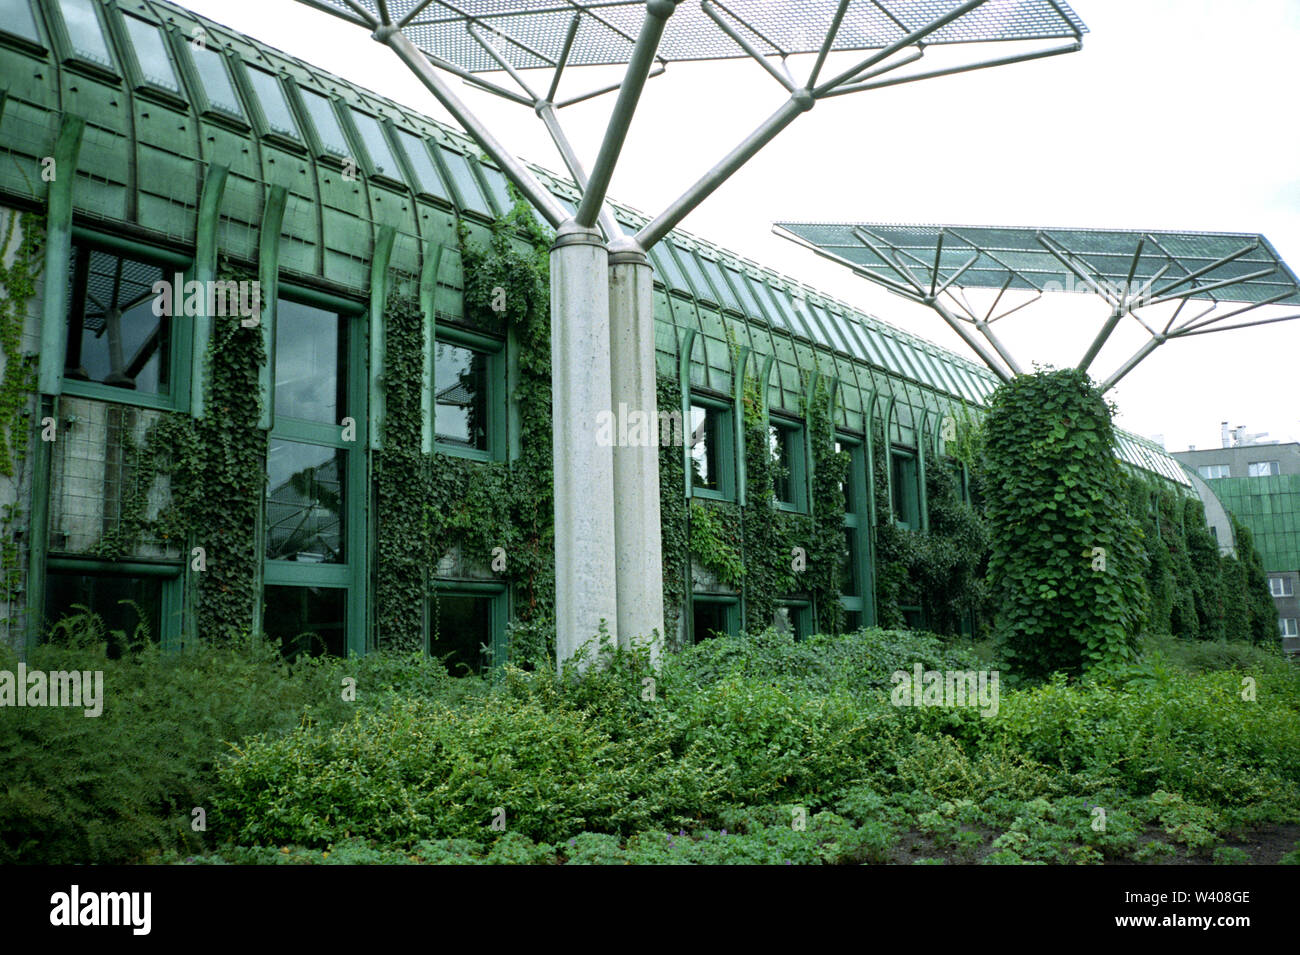 University of Warsaw Library with beautiful rooftop gardens Stock Photo